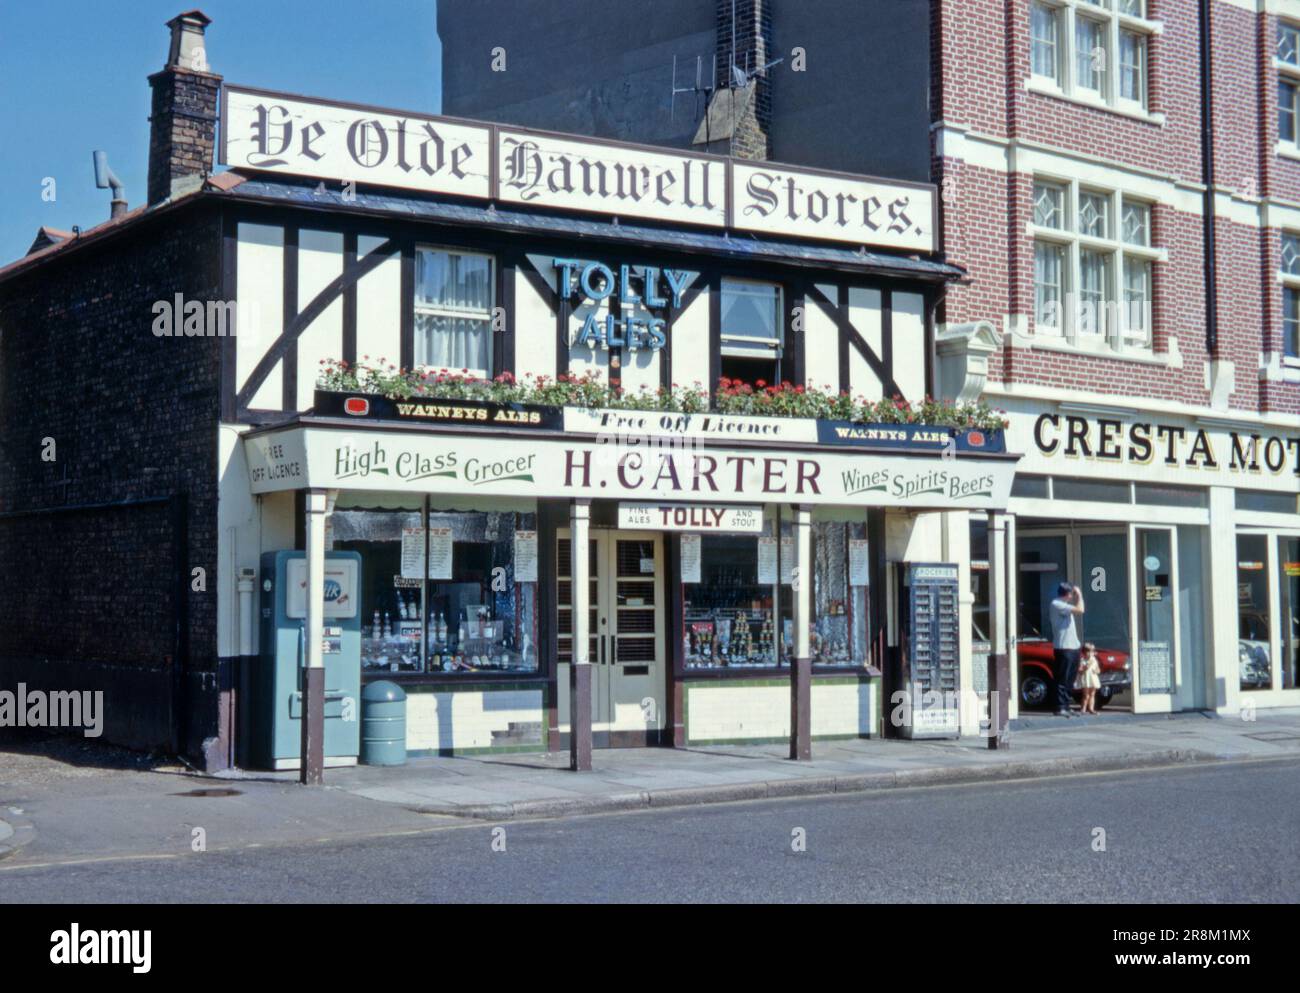 ‘Ye Olde Hanwell Stores, a ‘high class’ grocer and ‘free off licence’ or general store in the west London suburb of Hanwell, Ealing, England, UK c. 1970. The building sports a mock Tudor look with dark beams on a white façade and has a permanent canopy supported by wooden pillars. As well as groceries, alcohol was sold – the term 'off licence’ means it was not tied to a particular supplier of alcohol. Signs show it sold beers from Watneys and Tolly Cobbold. Vending machines outside allowed grocery items and milk to be sold out of hours – a vintage 1960/70s photograph. Stock Photo